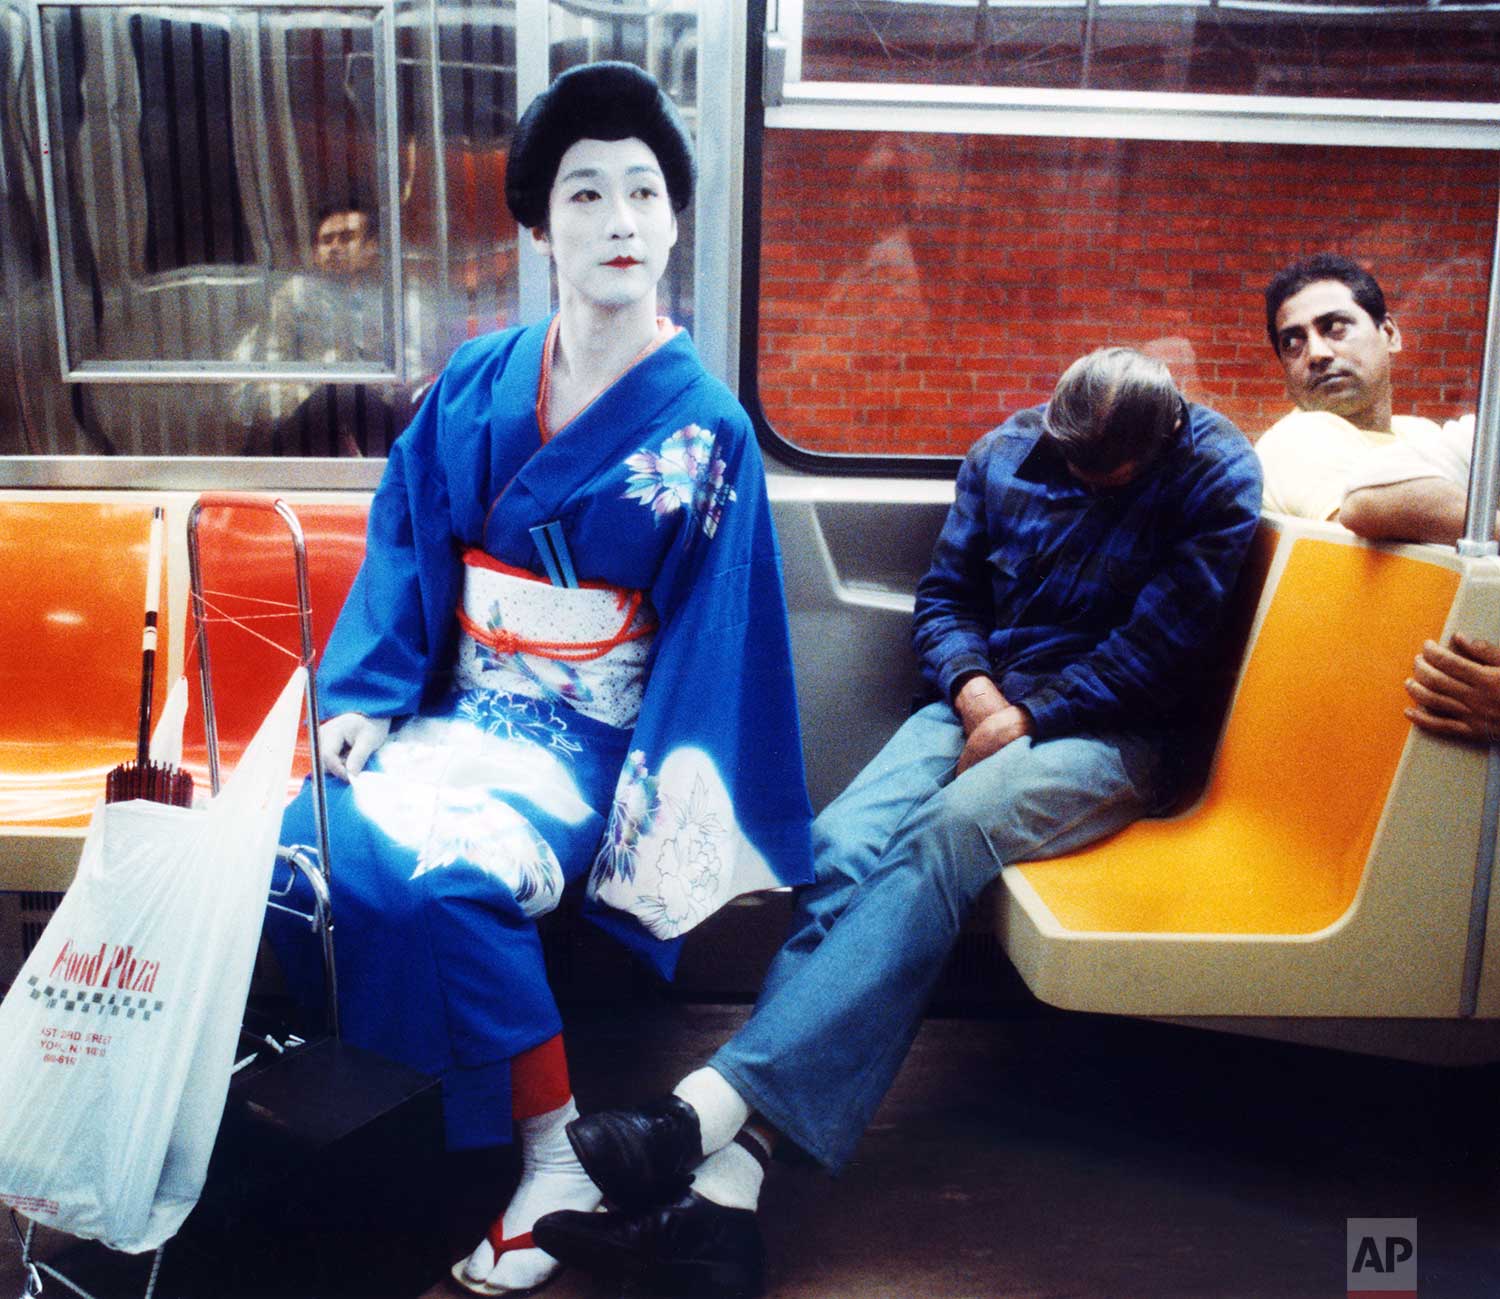  Japanese artist Hiroshi Soga rides a subway on his way to a performance in New York on June 14, 1989. Soga, in New York from Tokyo to exhibit his paintings and other creations, also performs interpretive dance based on ancient themes dressed in a tr